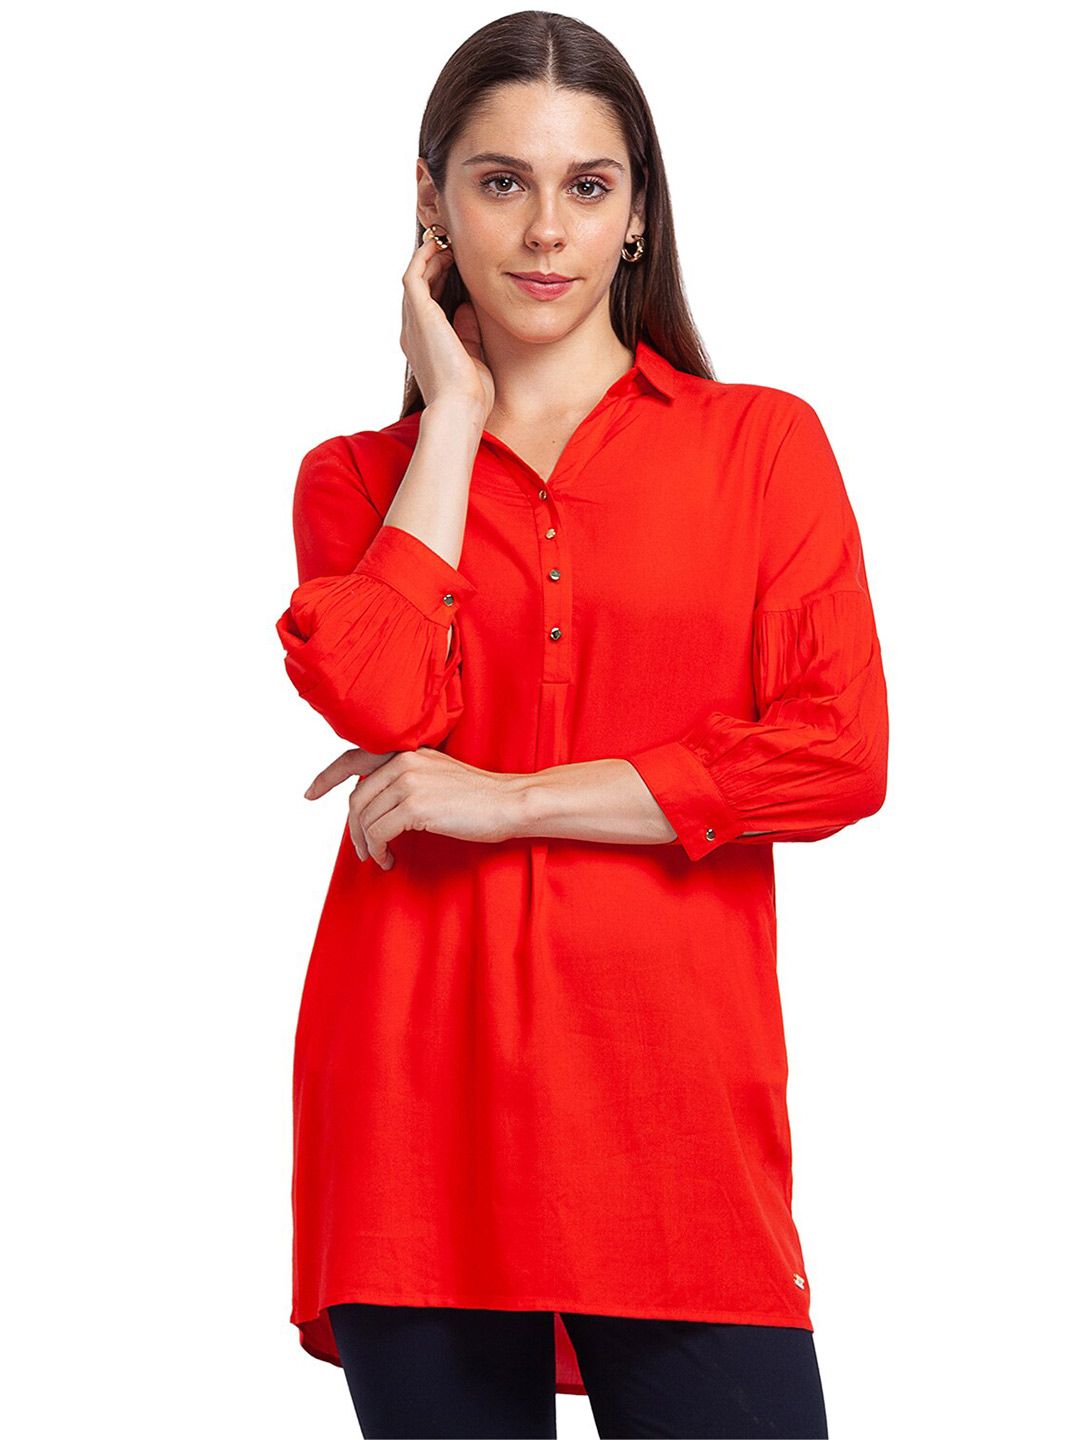 Park Avenue Red Roll-Up Sleeves Shirt Style Longline Top Price in India